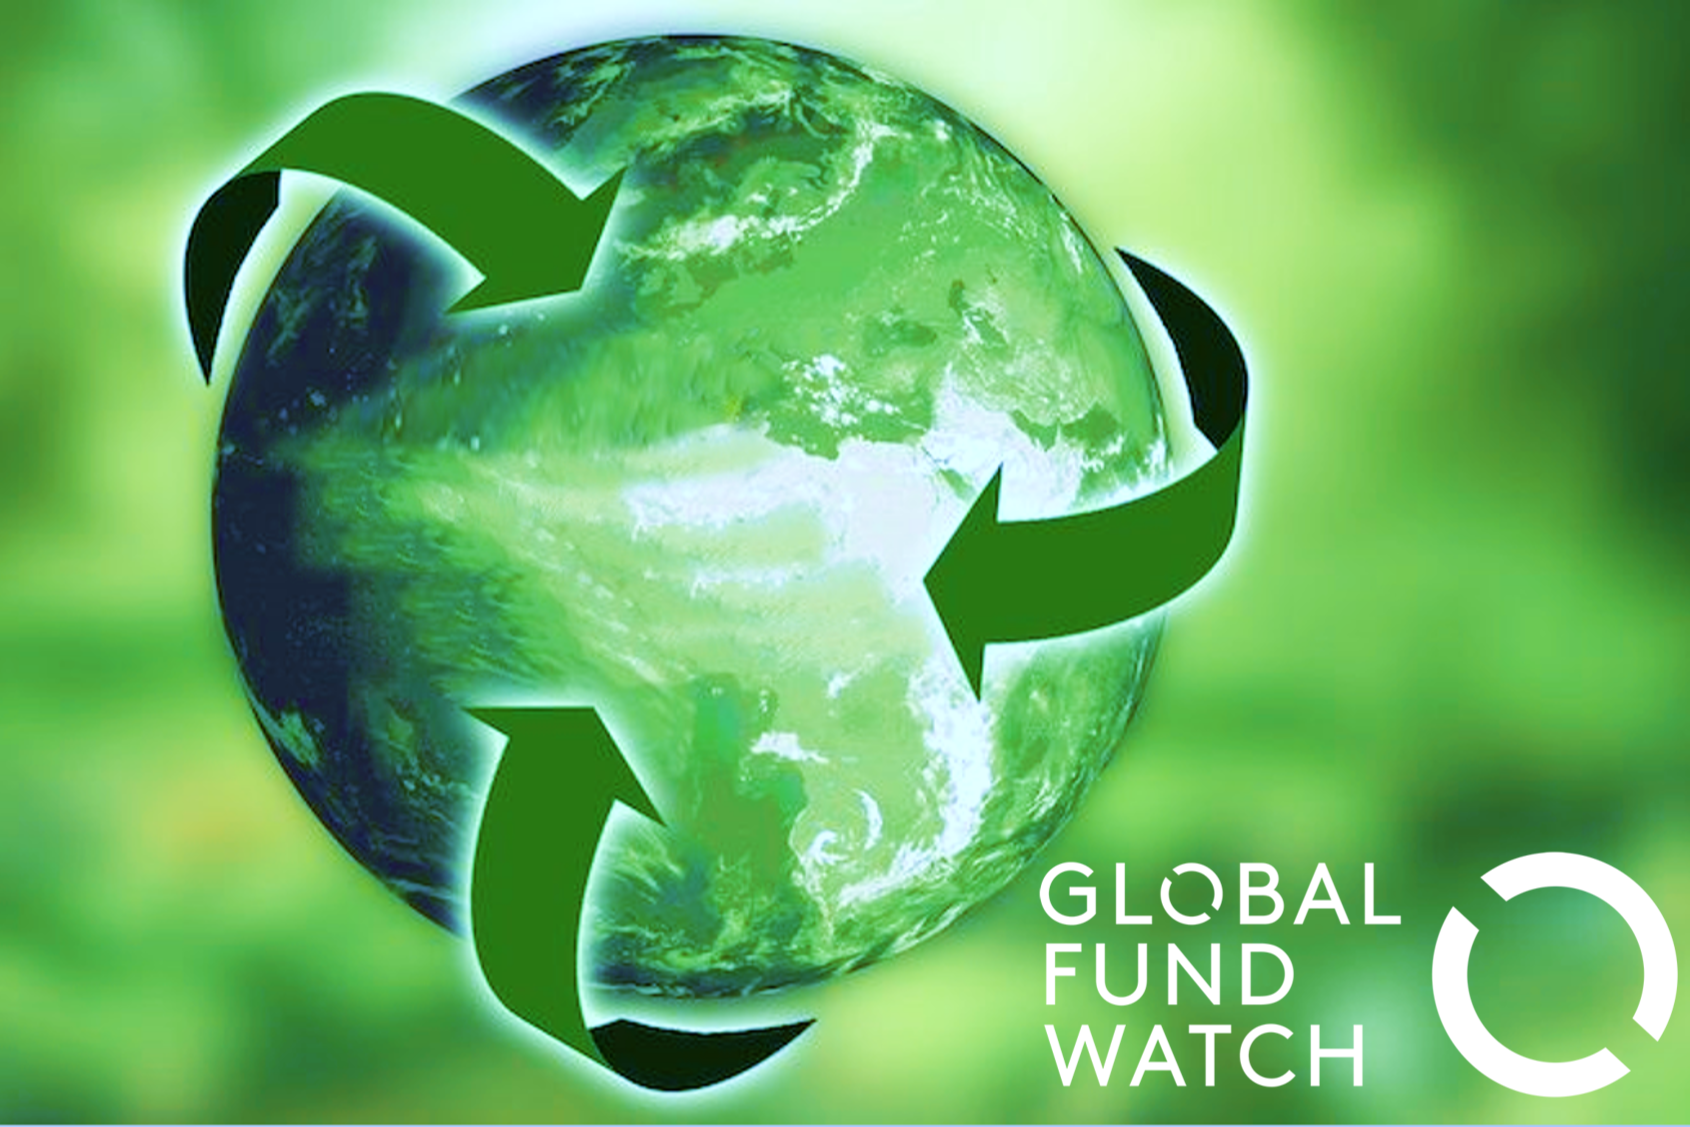 Global Fund Watch now offers a dedicated ESG module